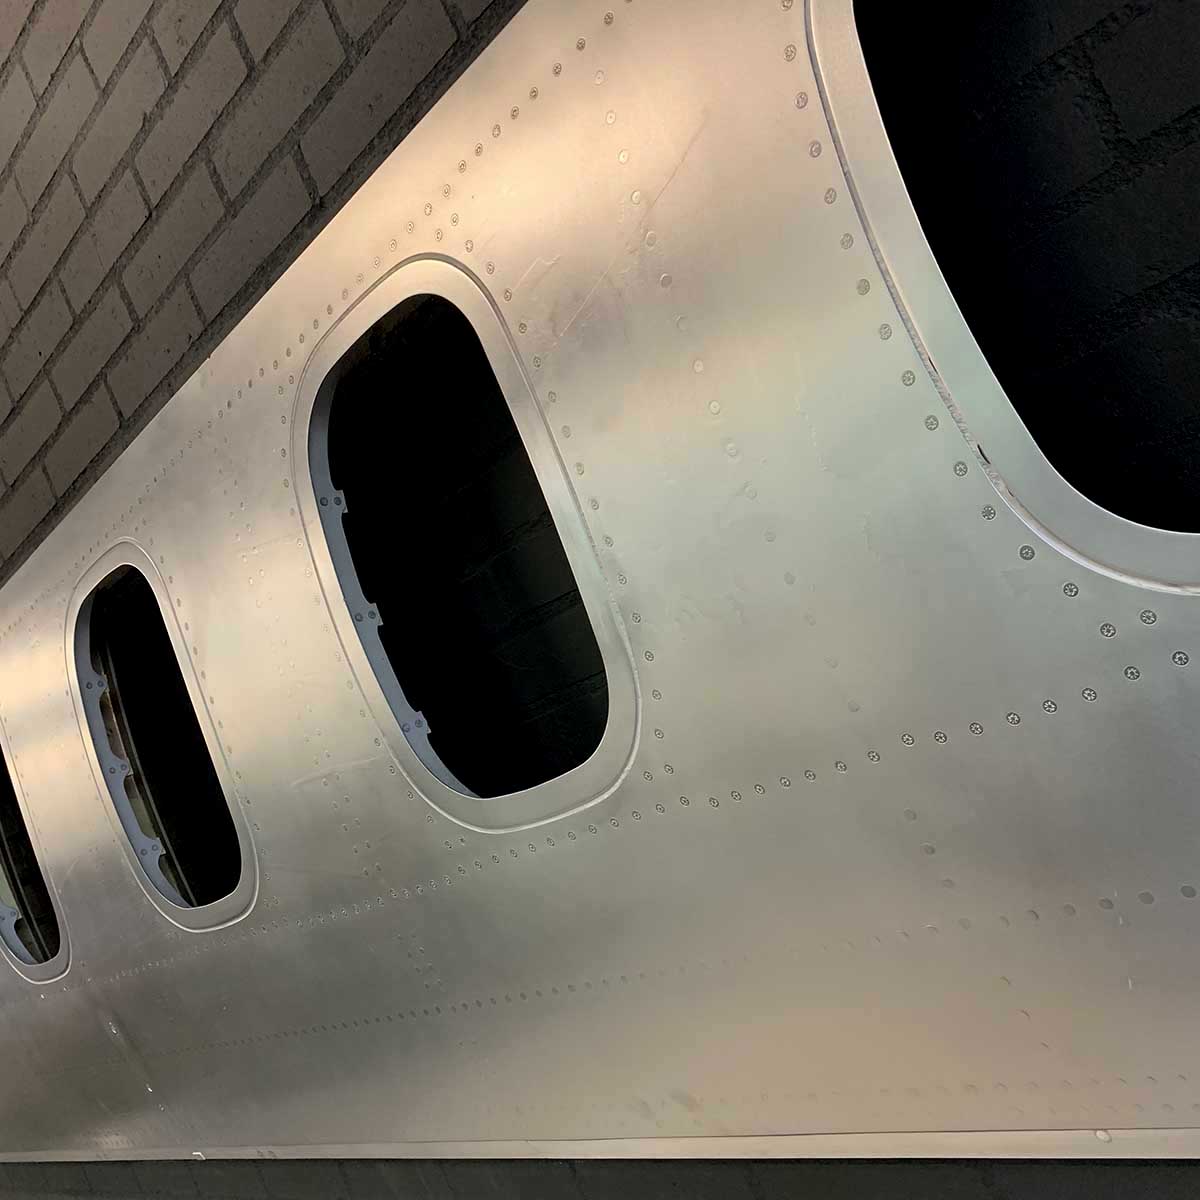 Detail showing the matte finish of a six-window panel of an ATR passenger aircraft turned into a decorative piece.